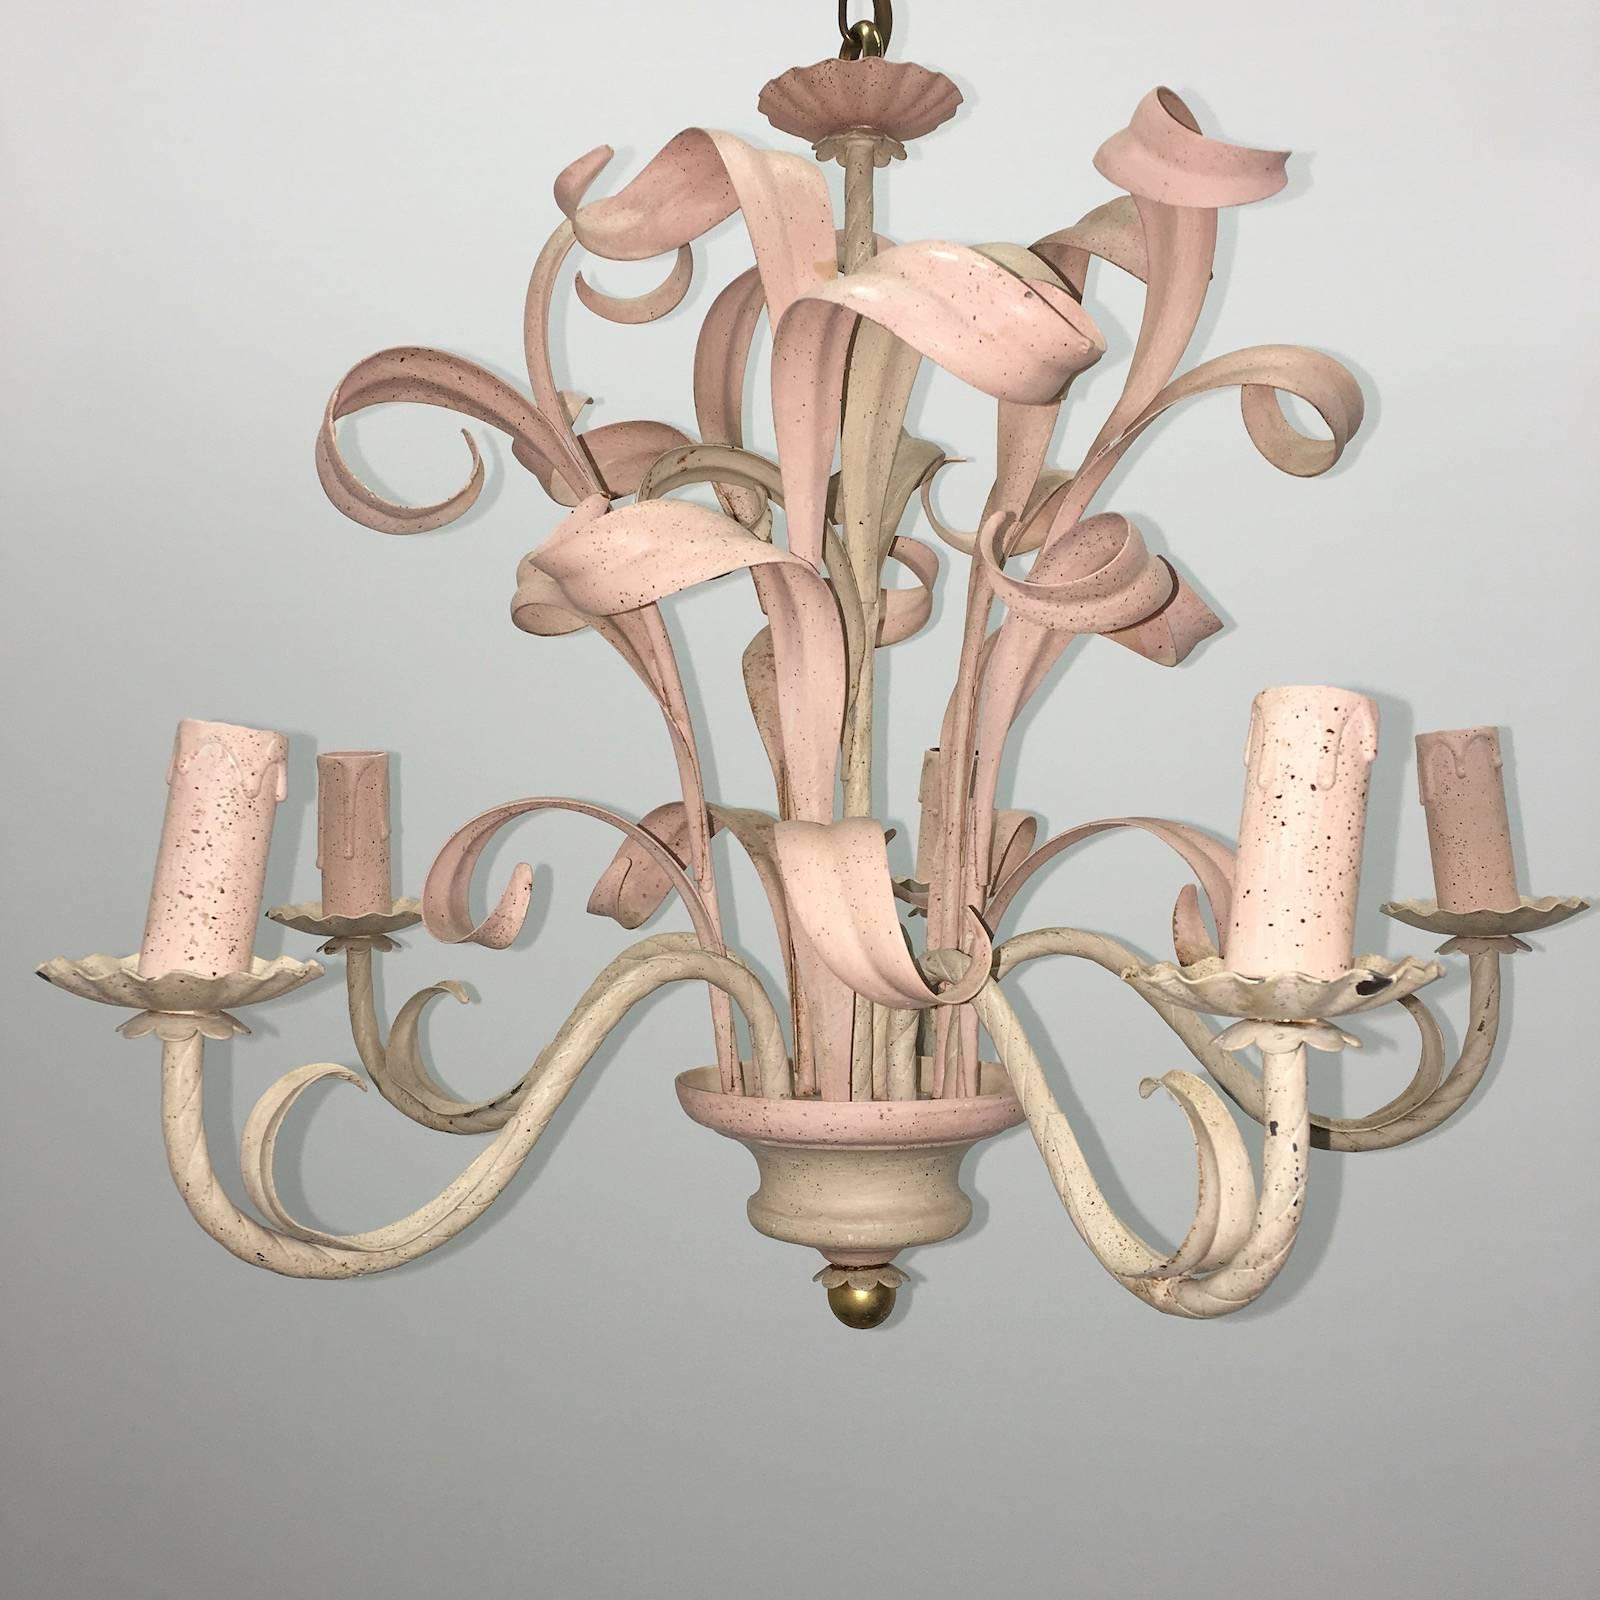 Exquisite Florentine style five-light chandelier. Functions as is with 5, E14 / 110 volt Light bulbs, 40 watt each bulb. Very cute for a girls room.